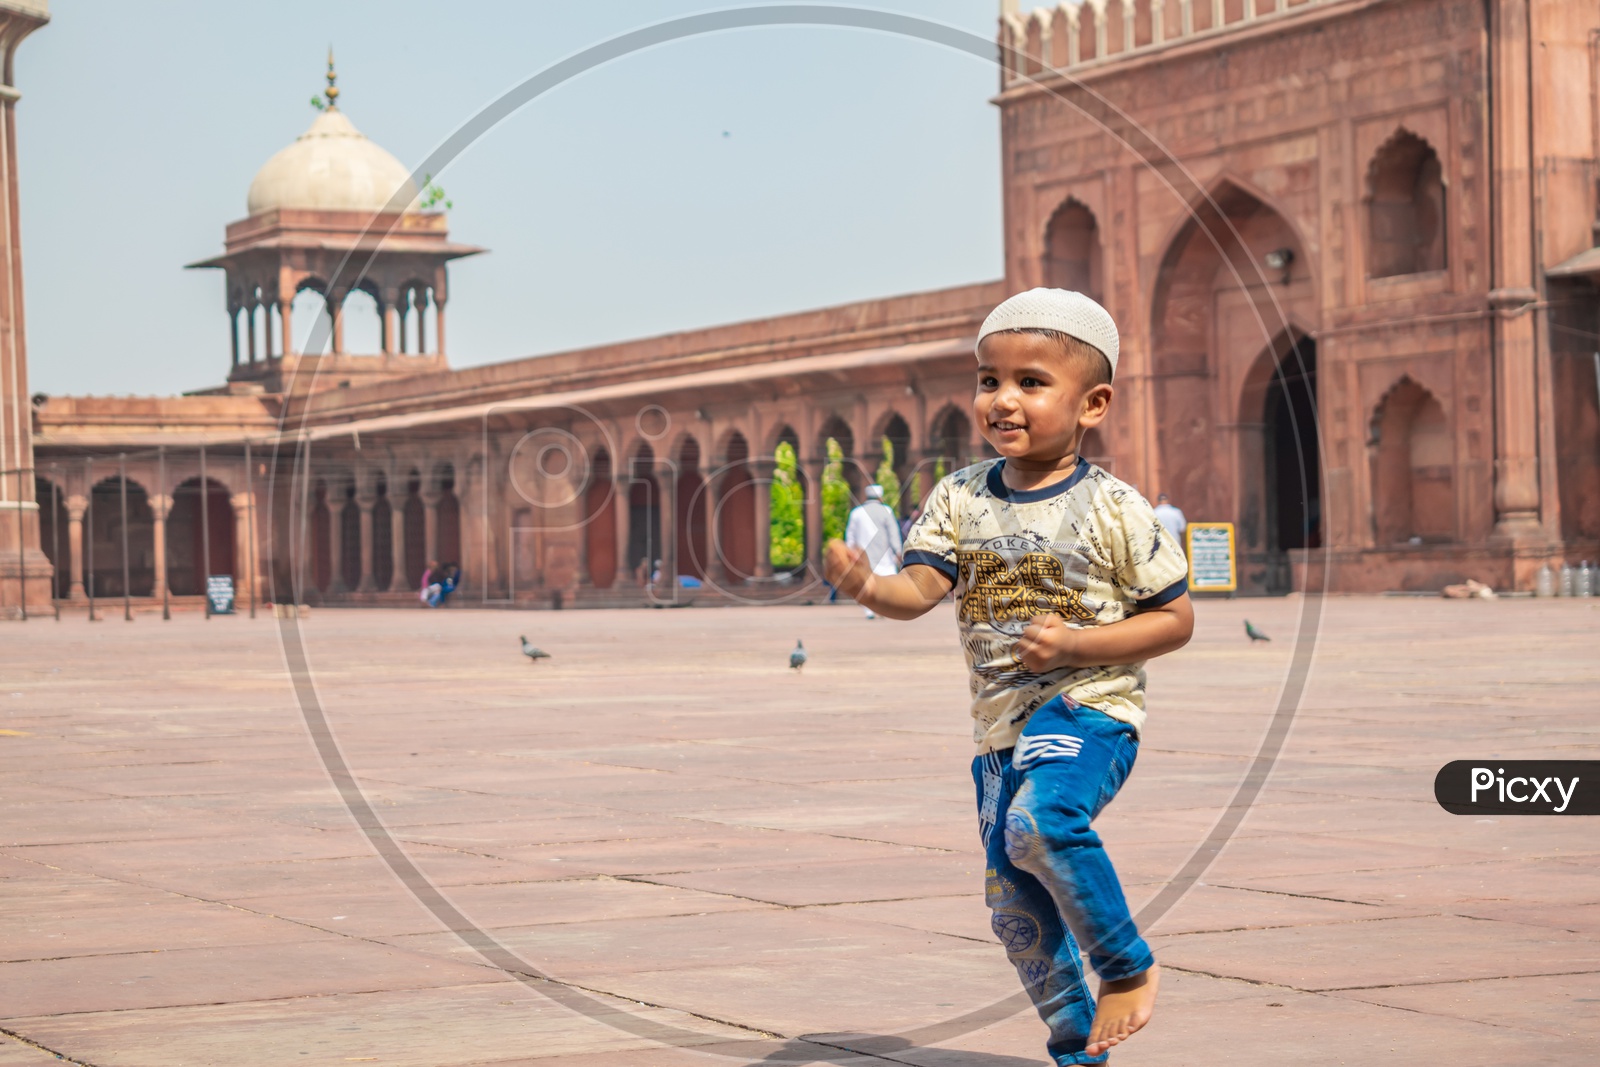 A child playing and enjoying on the day of Eid-ul-Fitr (End of the holy month of Ramadan) at Jama Masjid, Delhi